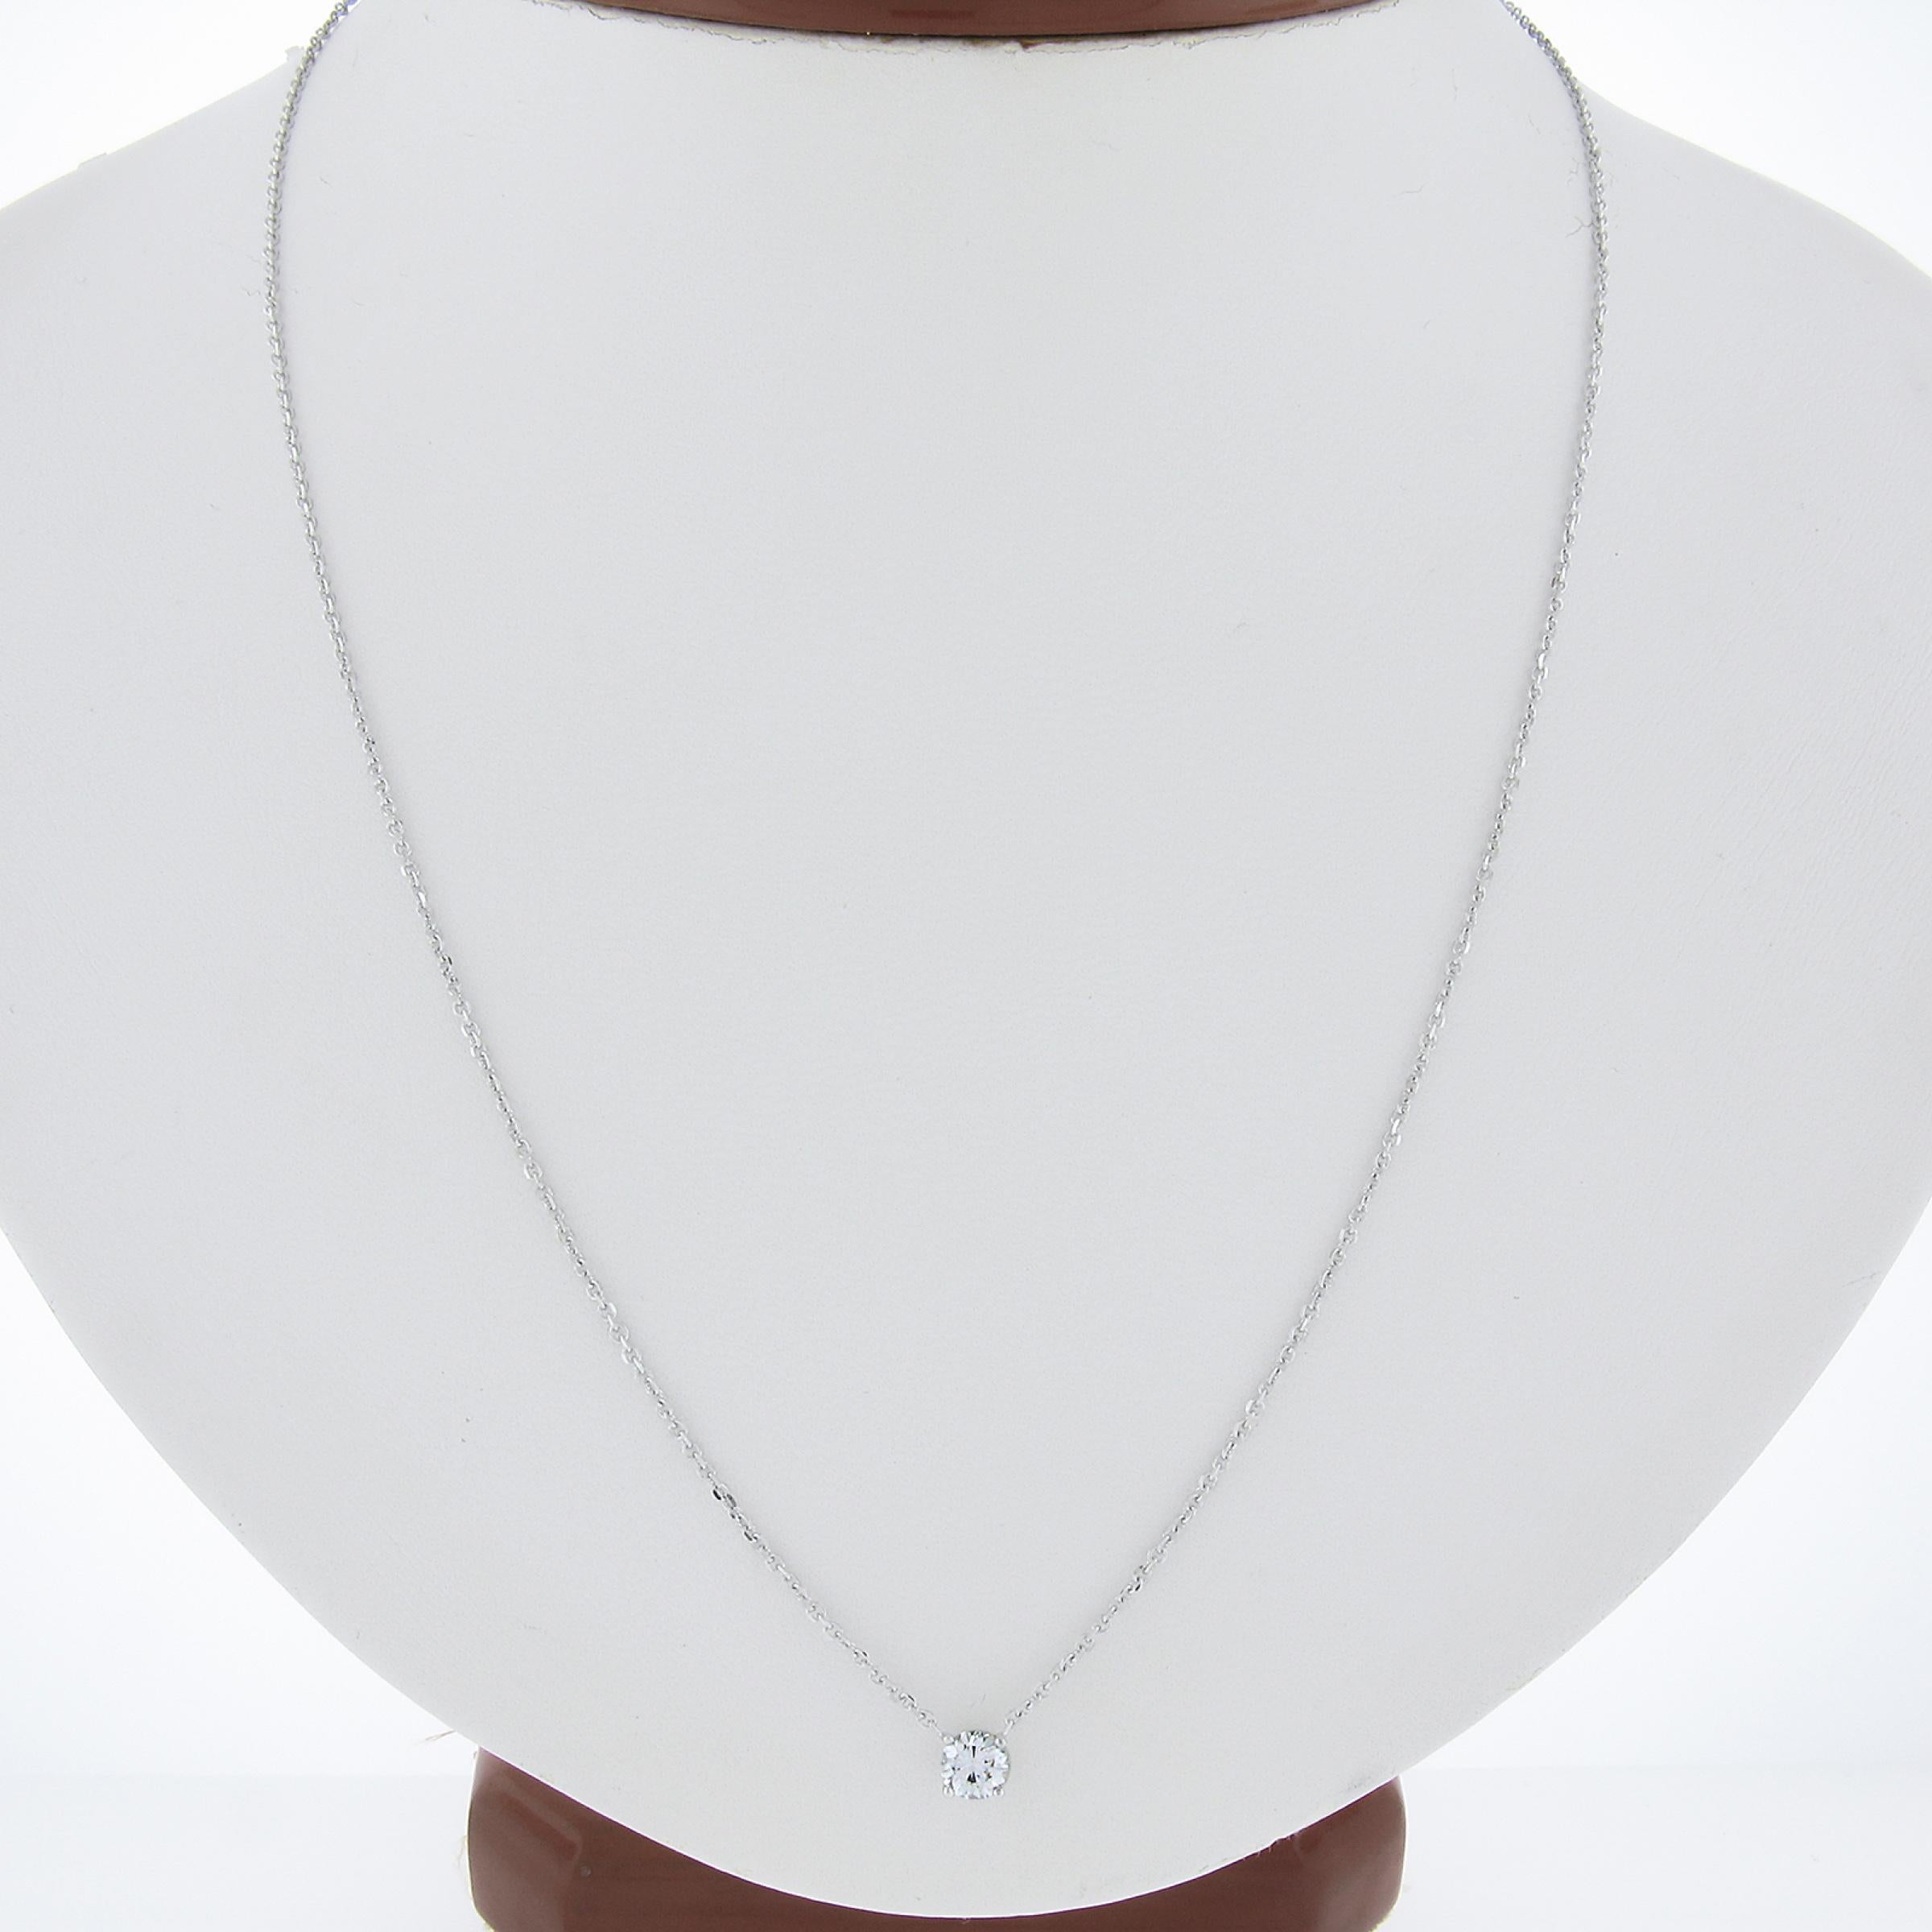 This new gorgeous classic pendant necklace that is crafted in solid 14k white gold and features a round brilliant cut diamond solitaire neatly prong set at the center of an open basket setting. The fine diamond weighs exactly 0.33 carats and